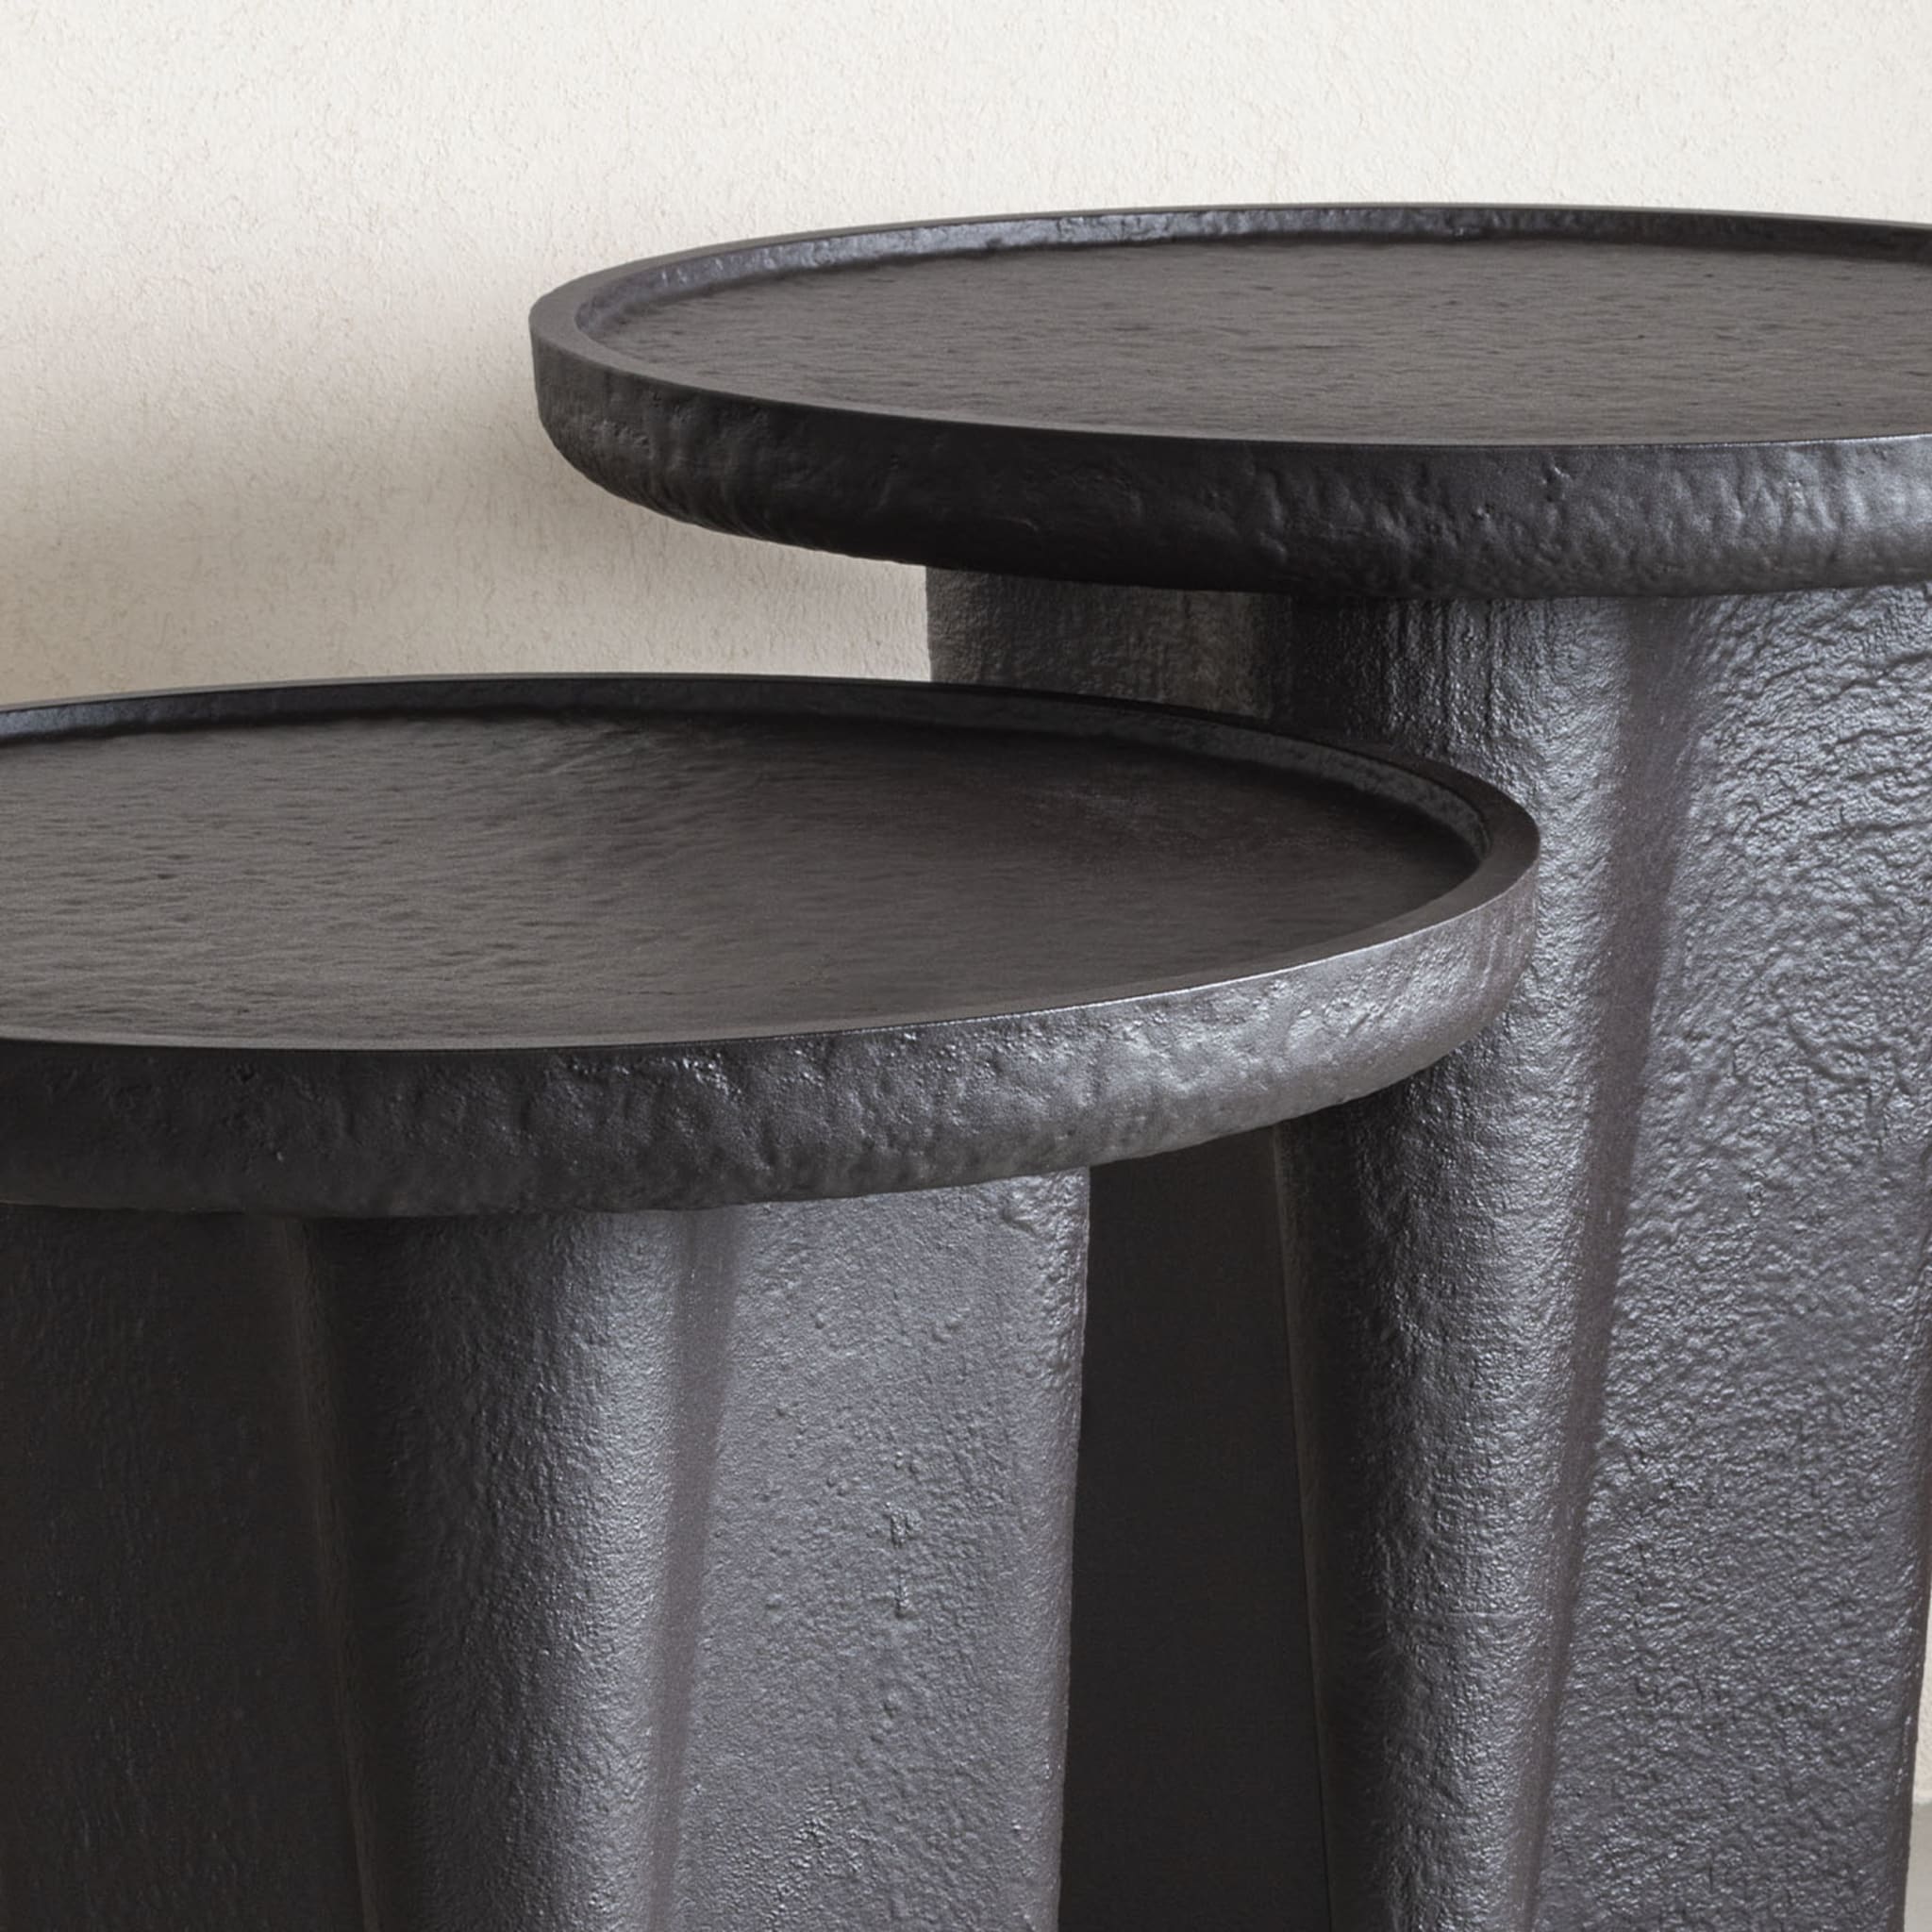 Tanell Imperfect Tall Bronze Side Table - Alternative view 3